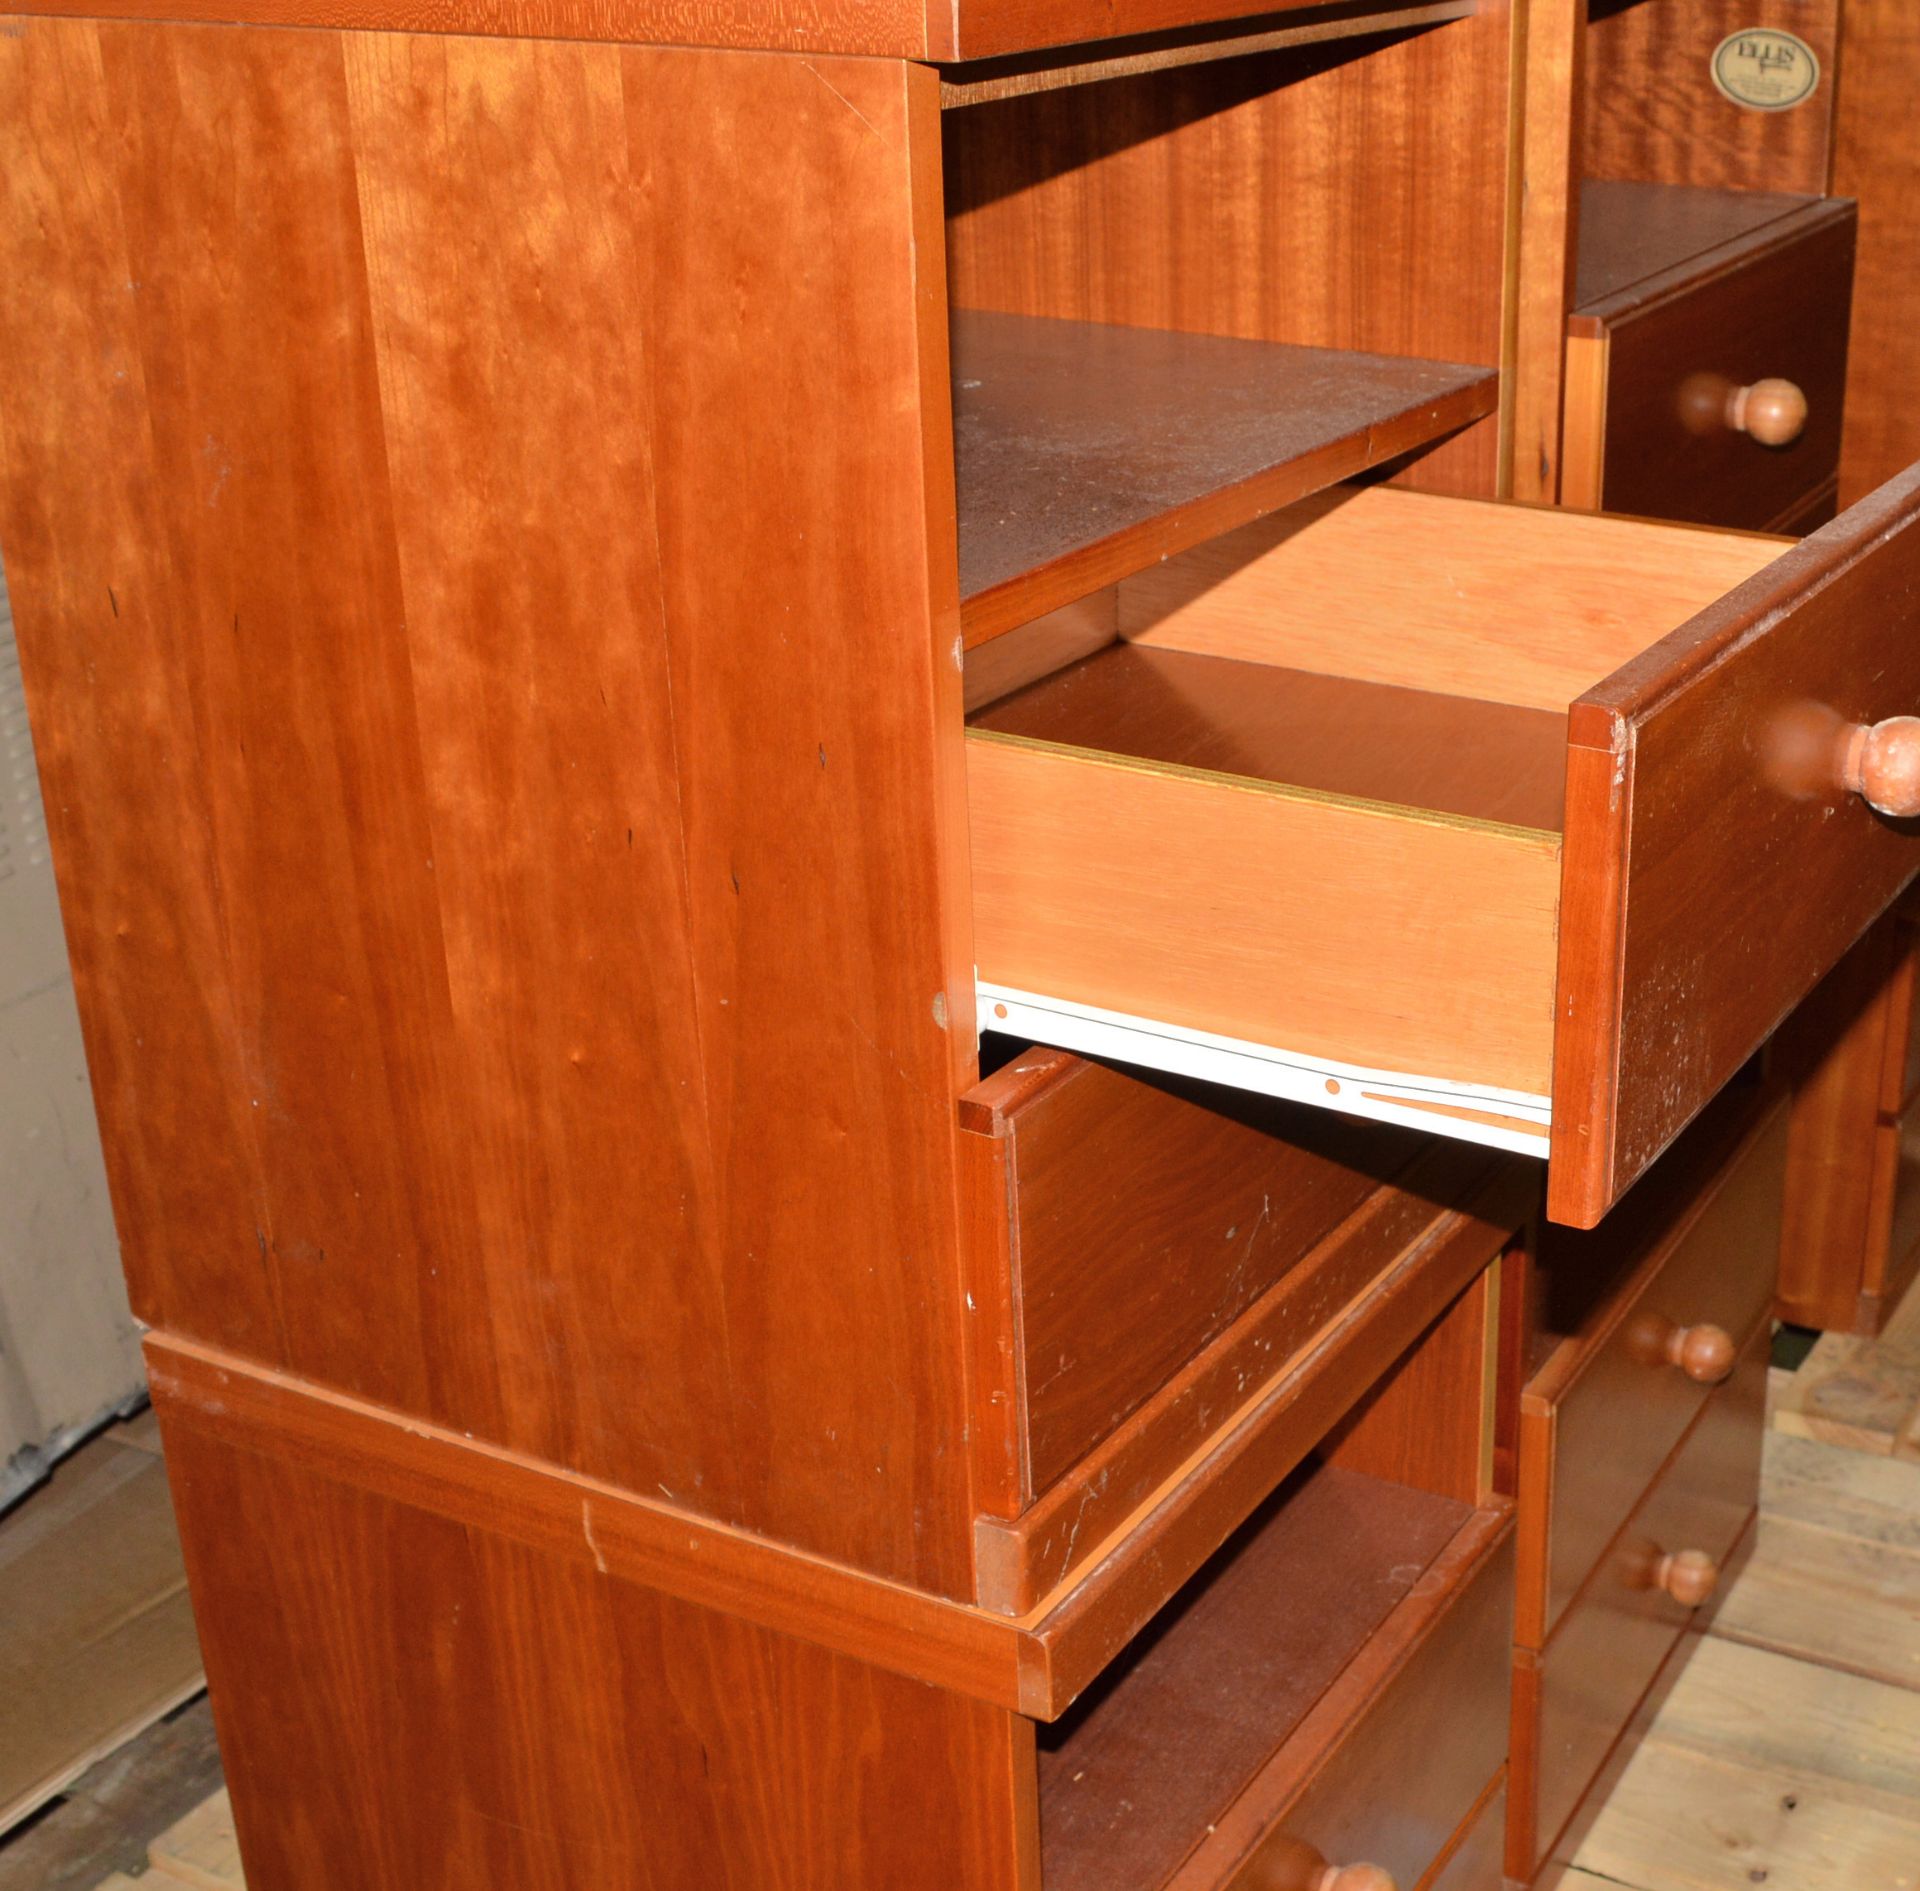 4x Bedside Cabinets - Cherry. - Image 2 of 2